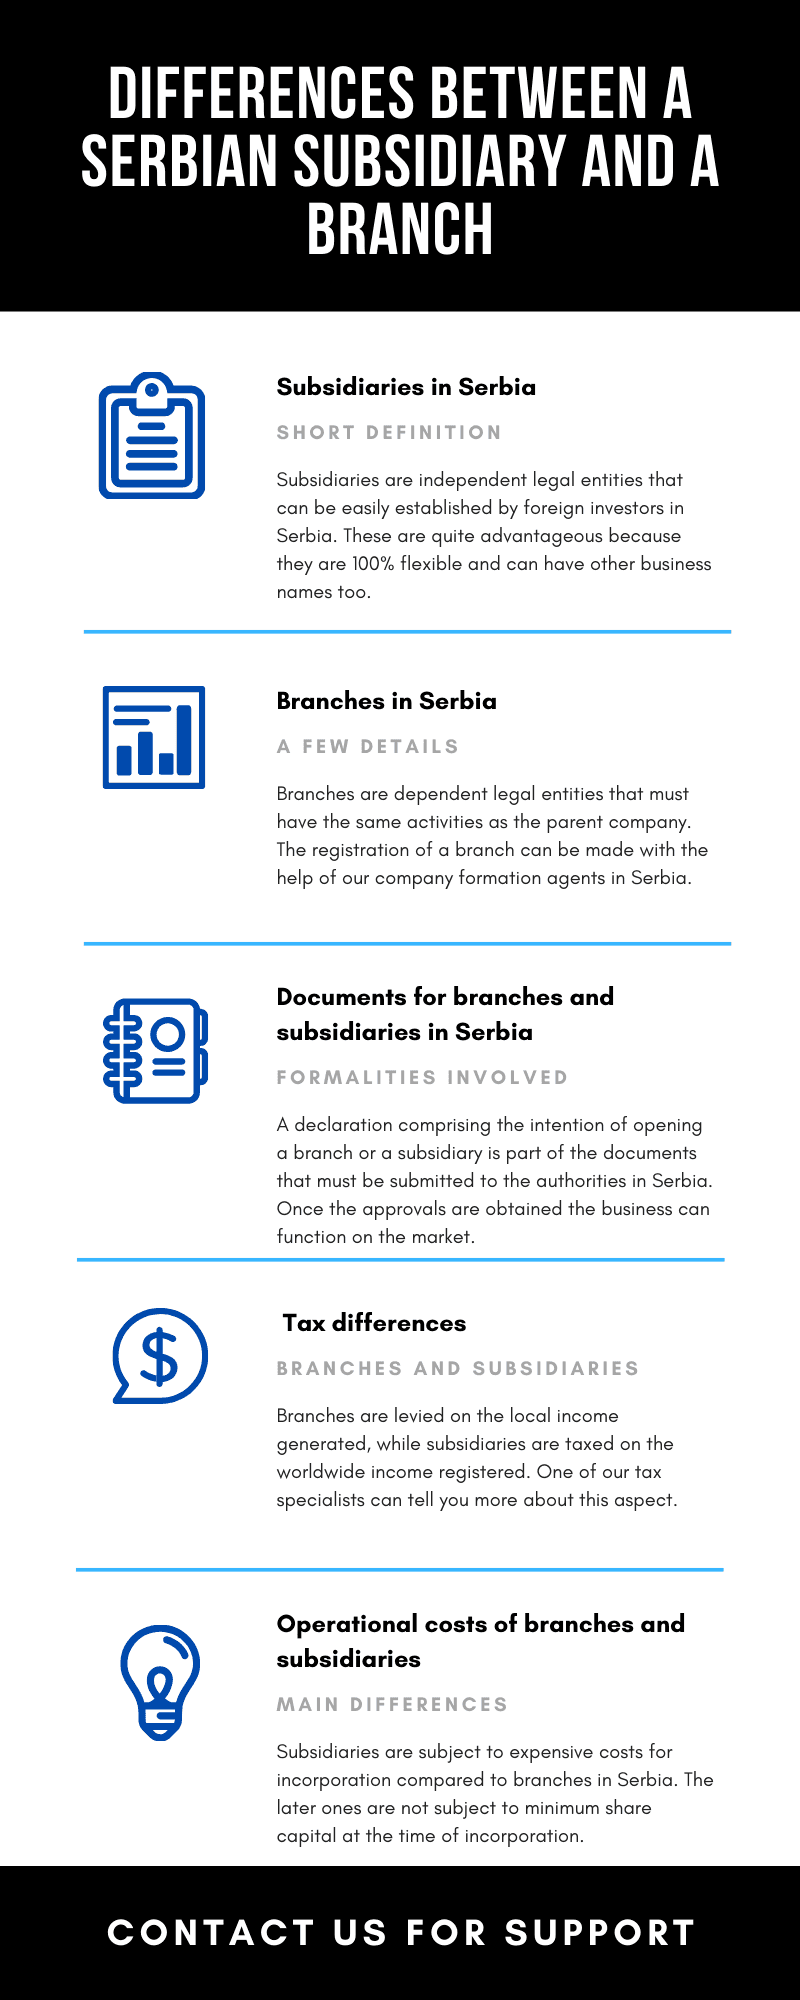 Differences between a Serbian subsidiary and a branch1.png